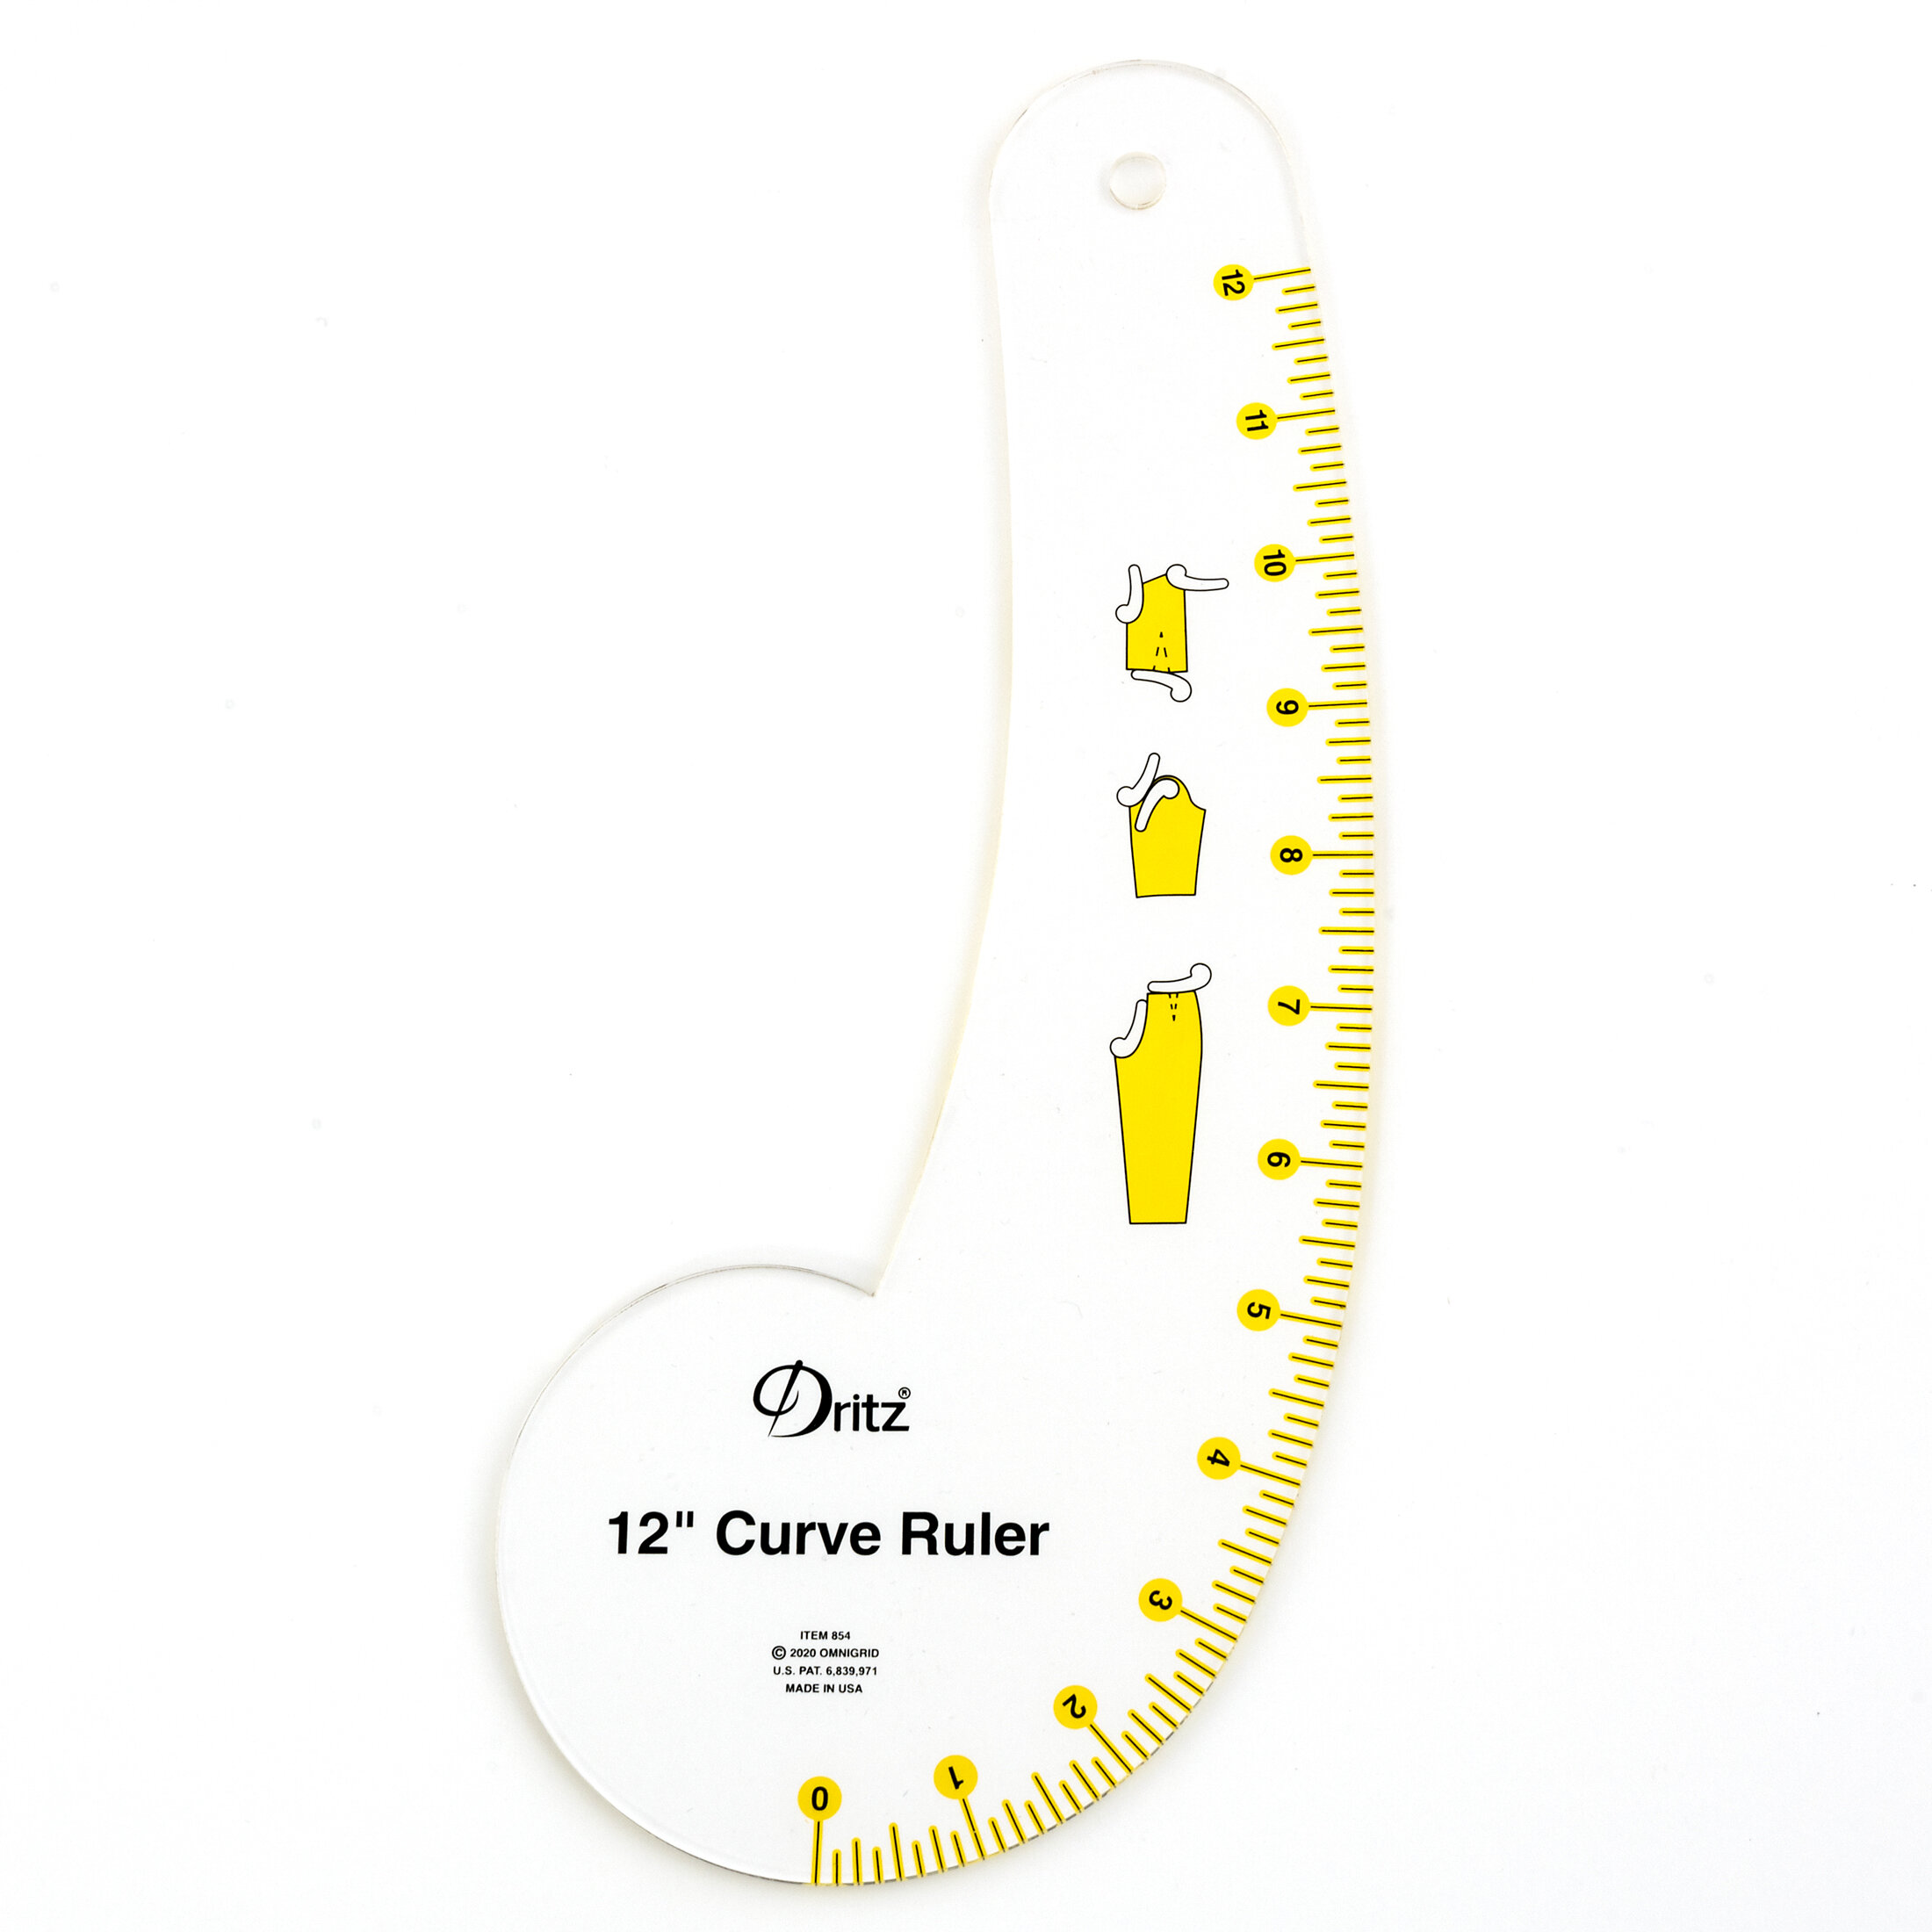 Dritz Styling Design Ruler with How-To Illustrations